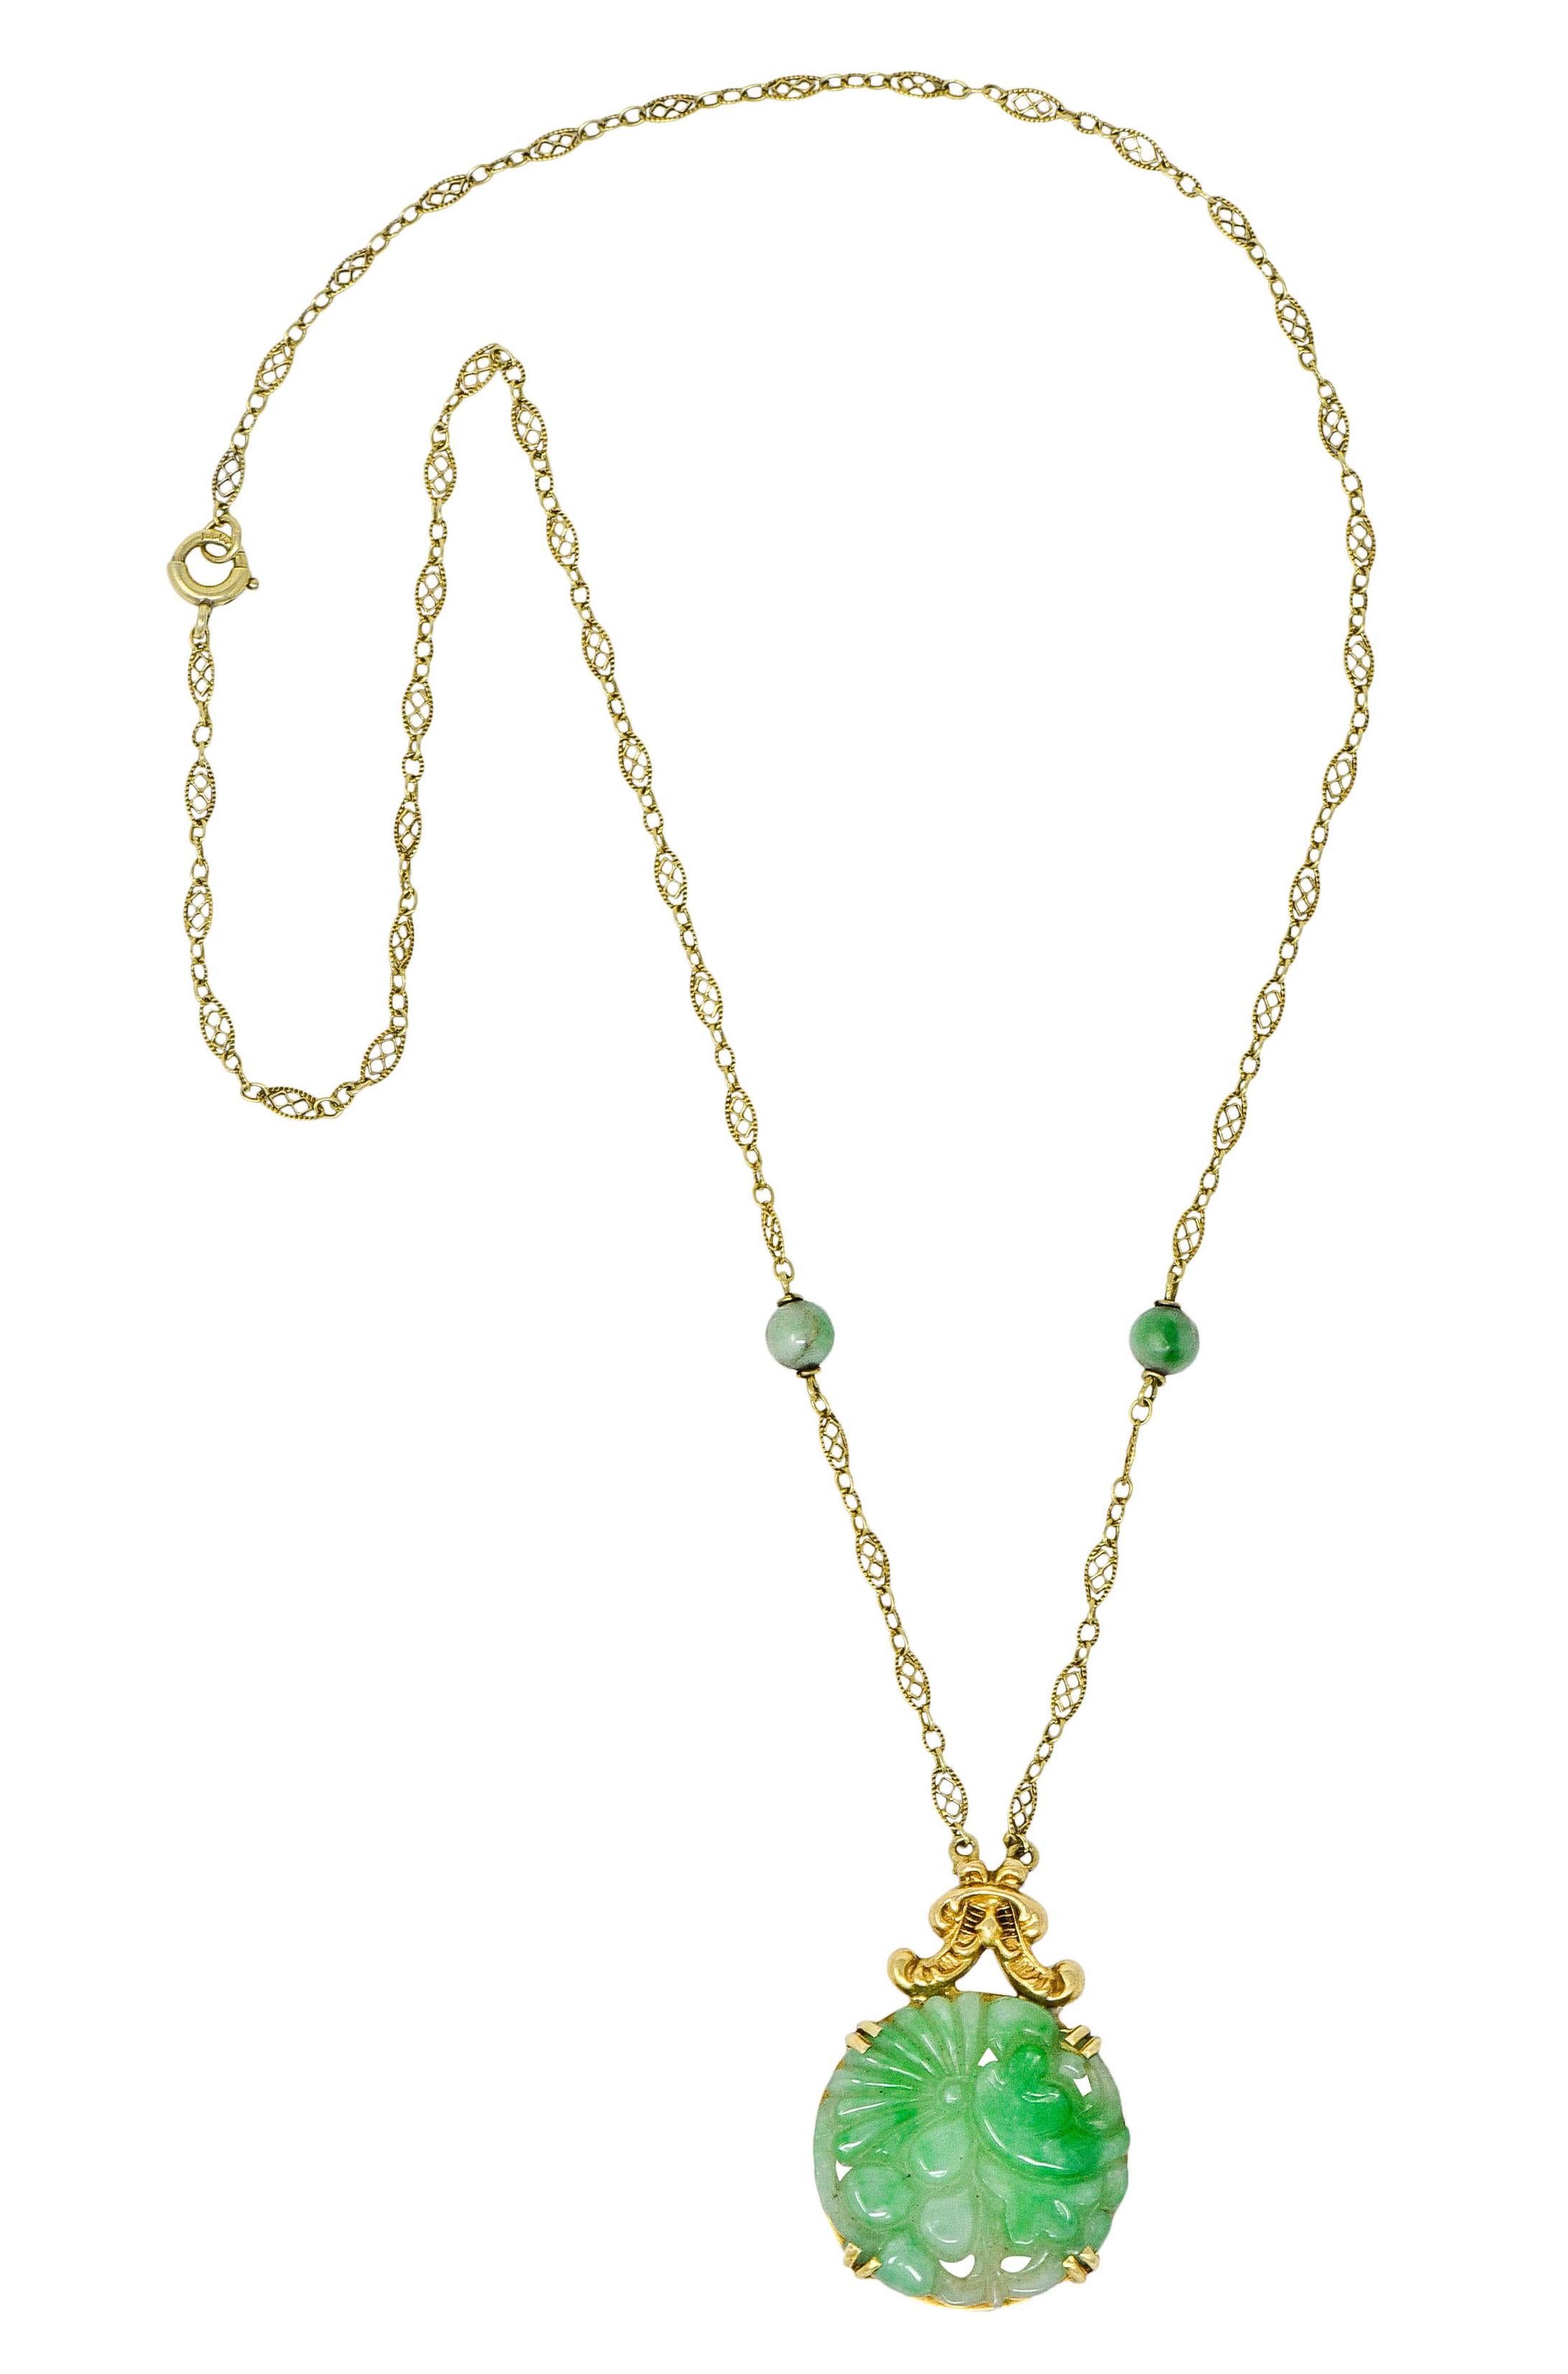 Circular pendant is comprised of deeply carved jade, depicting a floral and foliate motif

Translucent and mottled very light green to green in color

With a gold foliate surmount suspended from a delicately pierced link chain necklace

Accented by